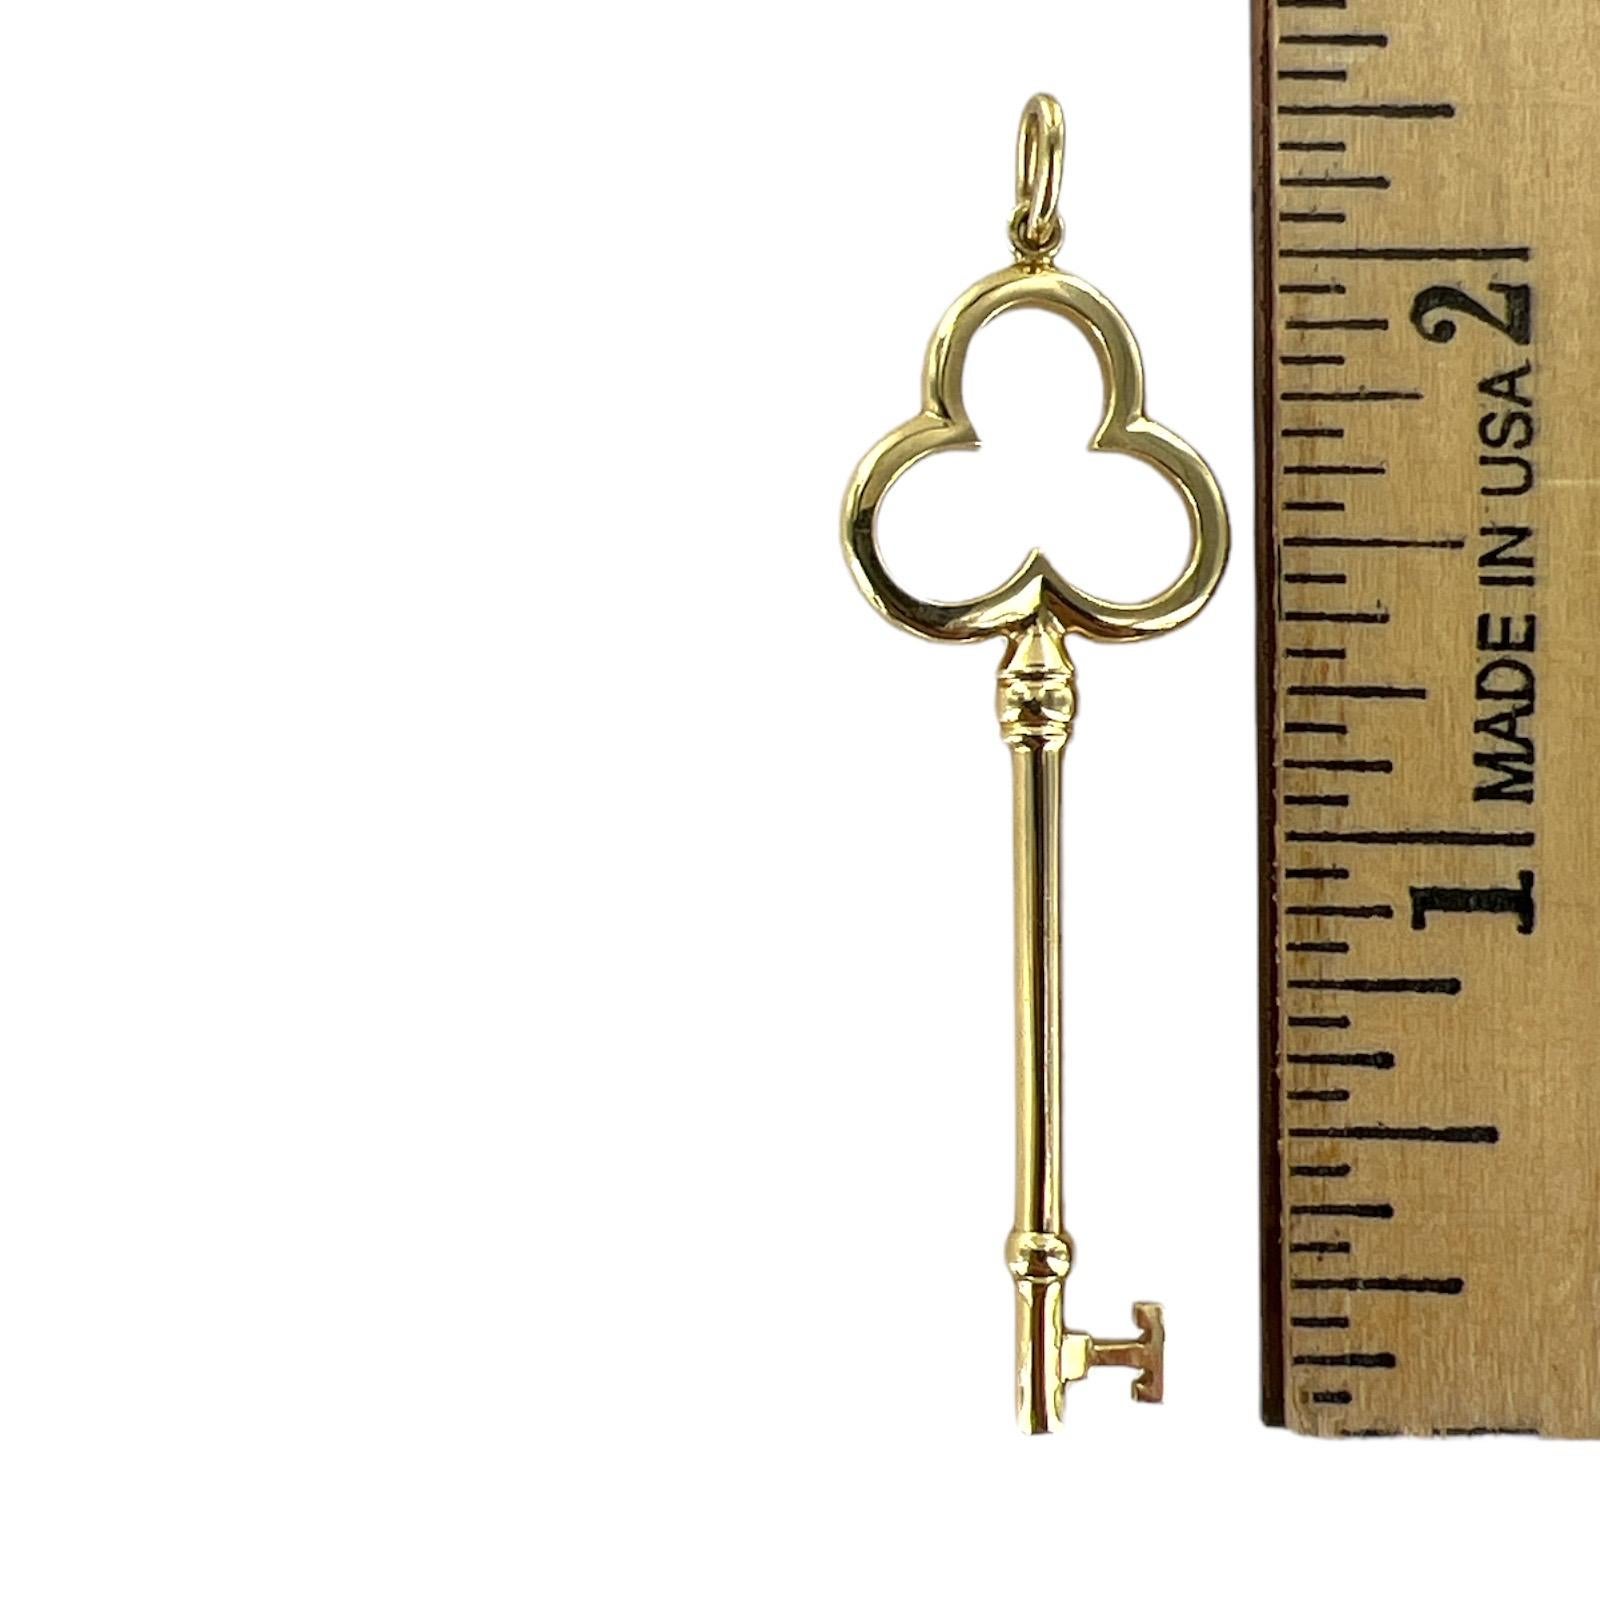 Tiffany & Co. popular key pendant crafted in 18 karat yellow gold. The trefoil design is on top, and the key meaures 2.00 inches in length and .75 inches in width. Signed Tiffany & Co. 750. Does not come with chain. 